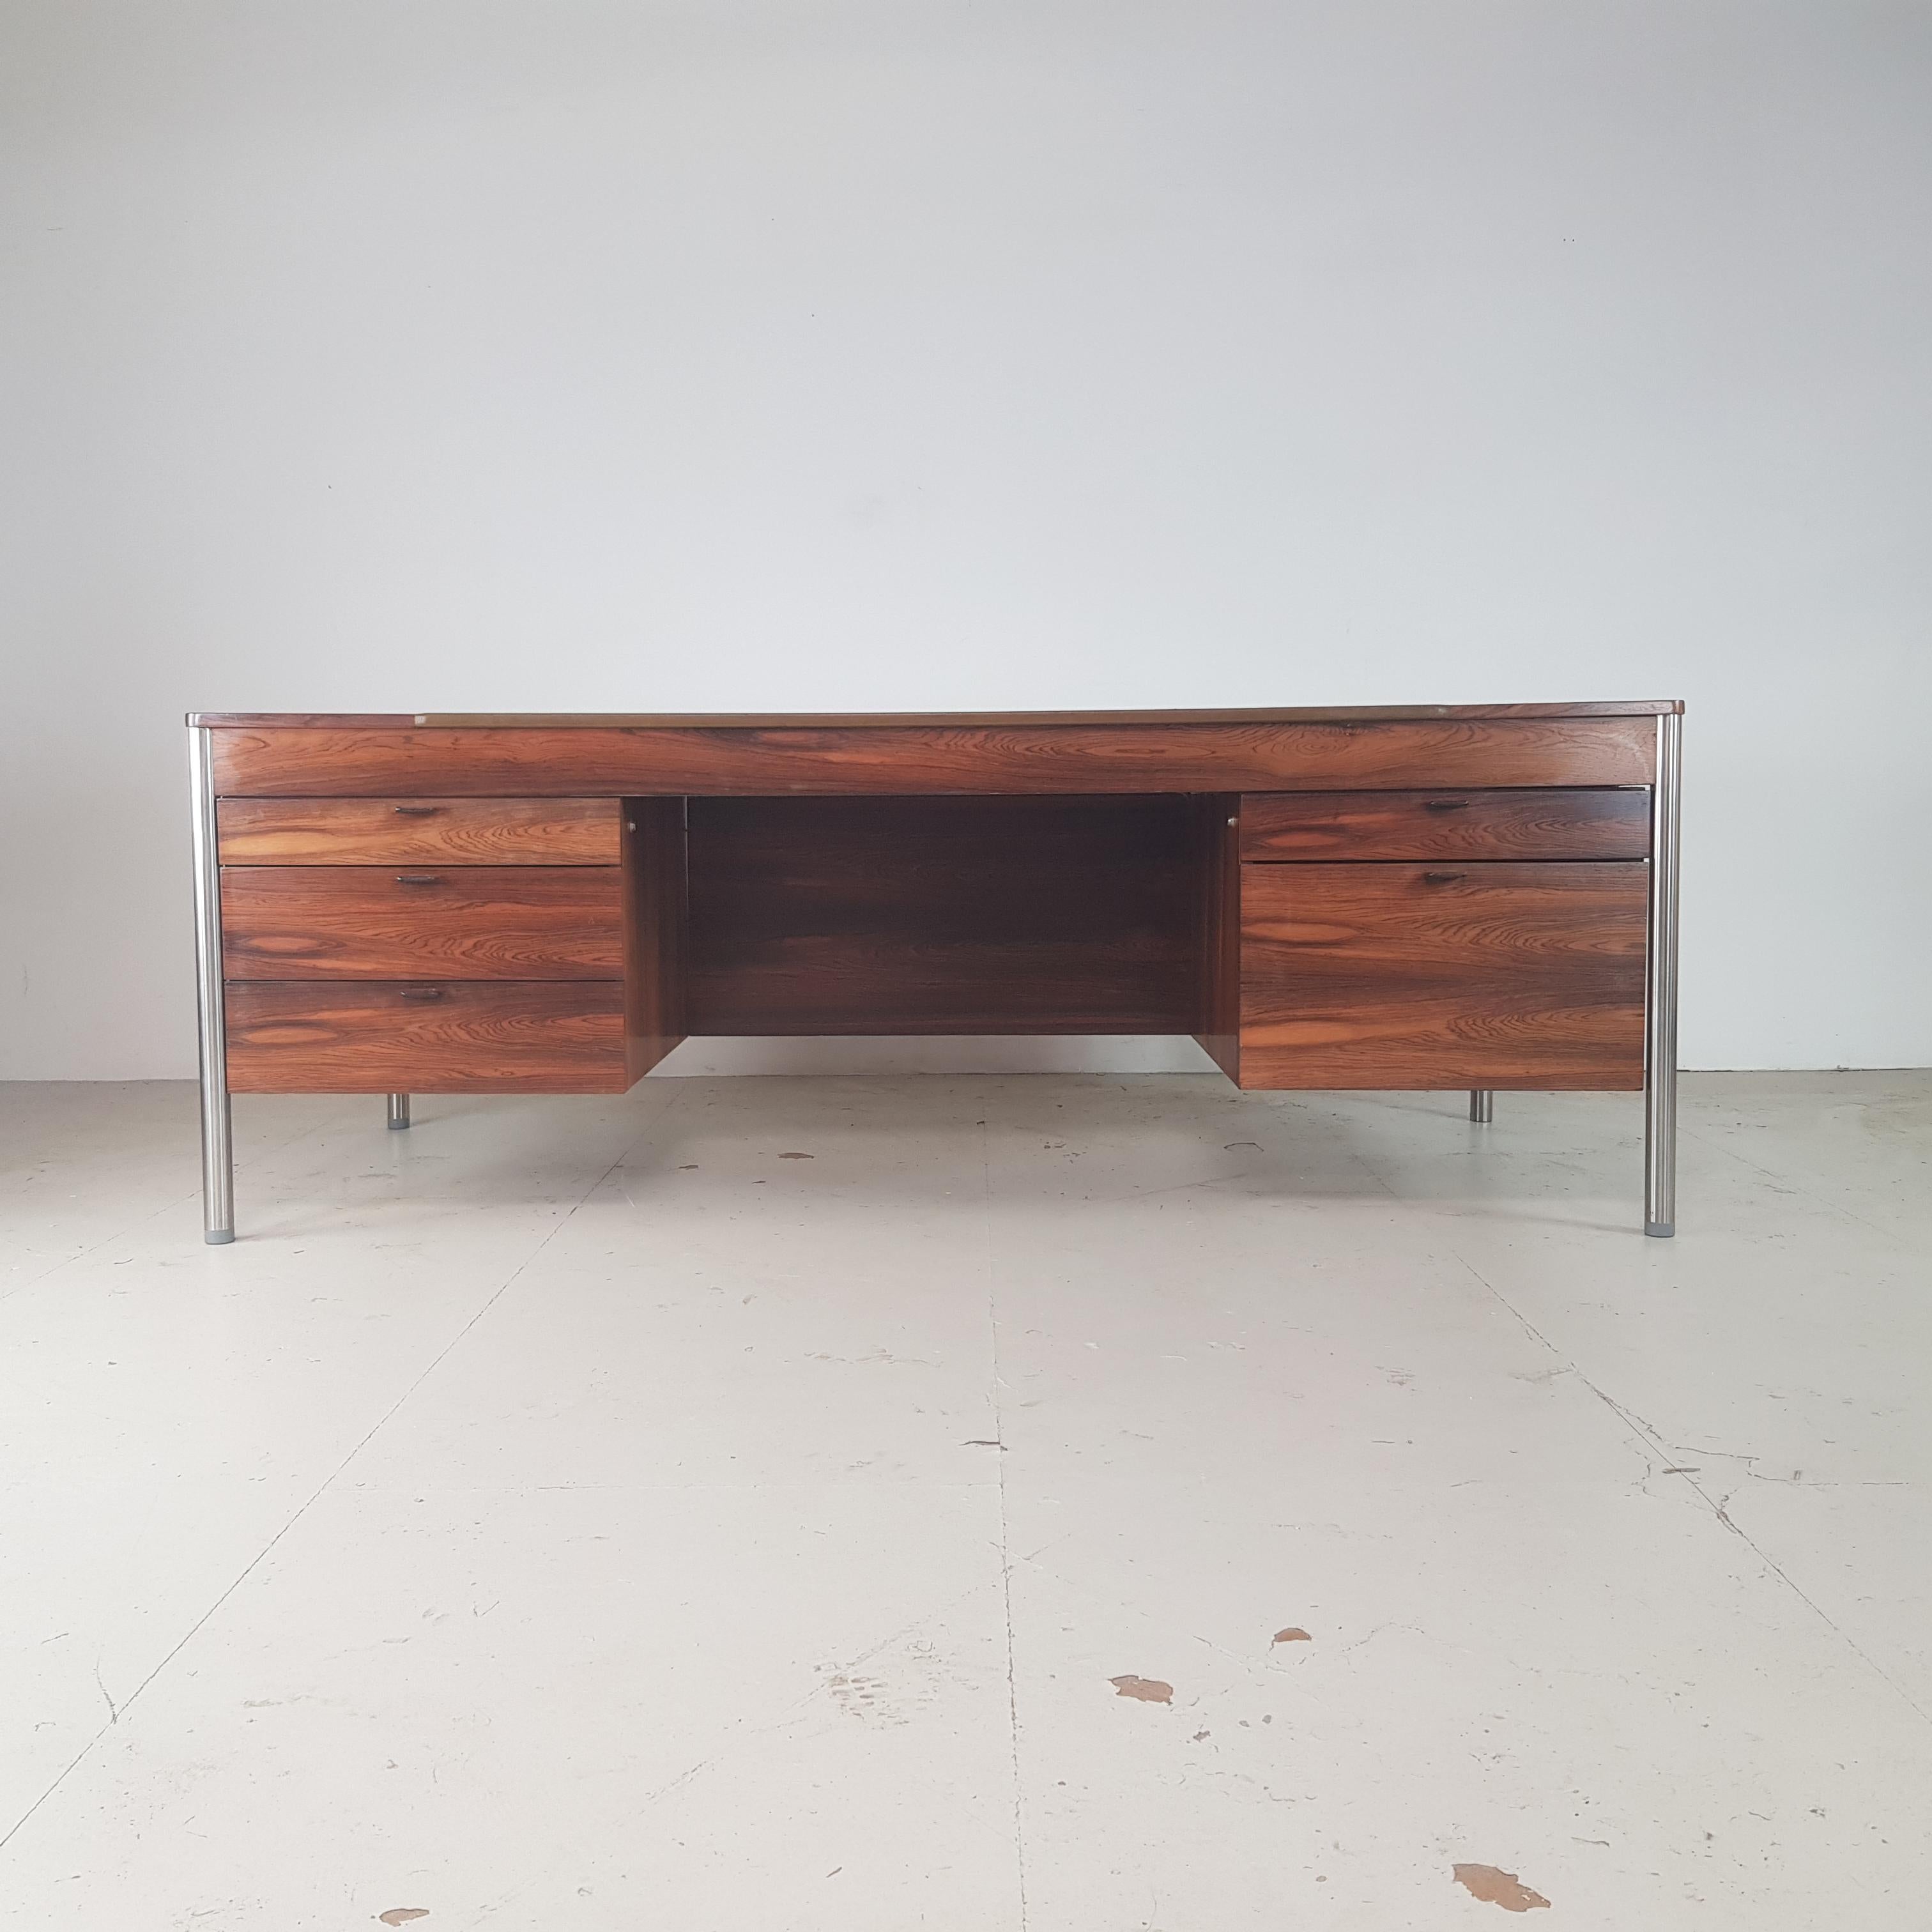 Vintage midcentury executive double pedestal rosewood desk designed by Robert Heritage for Archie Shine and sold in Heals in the early 1960s.

With 5 drawers and standing on chrome supports. Also comes with two rosewood coasters that must have